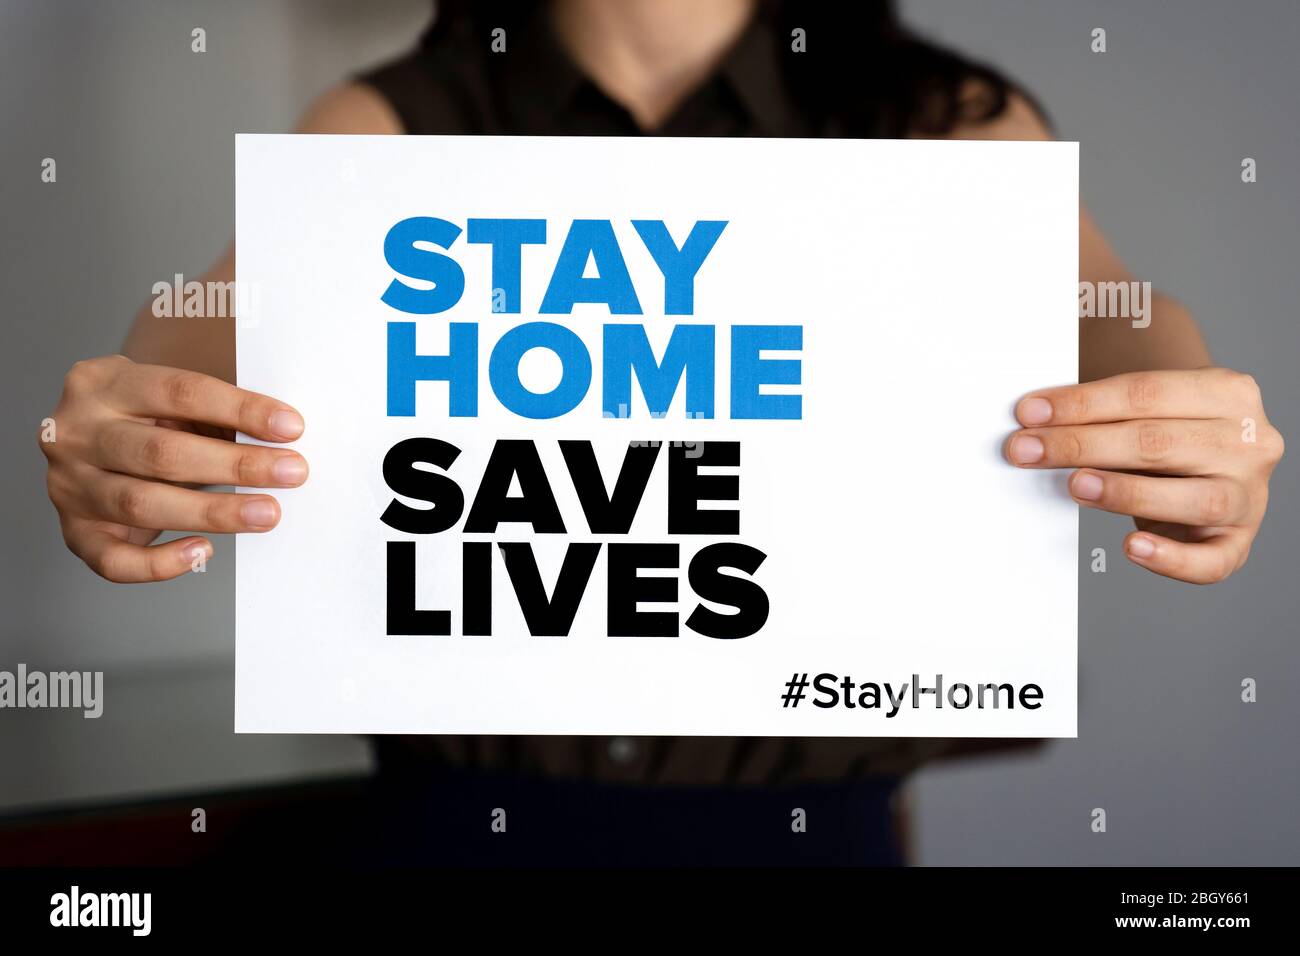 Woman holding sign 'Stay Home Save Lives' global message amid coronavirus crisis. Quarantine message across the globe to fight COVID-19 pandemic. Stock Photo